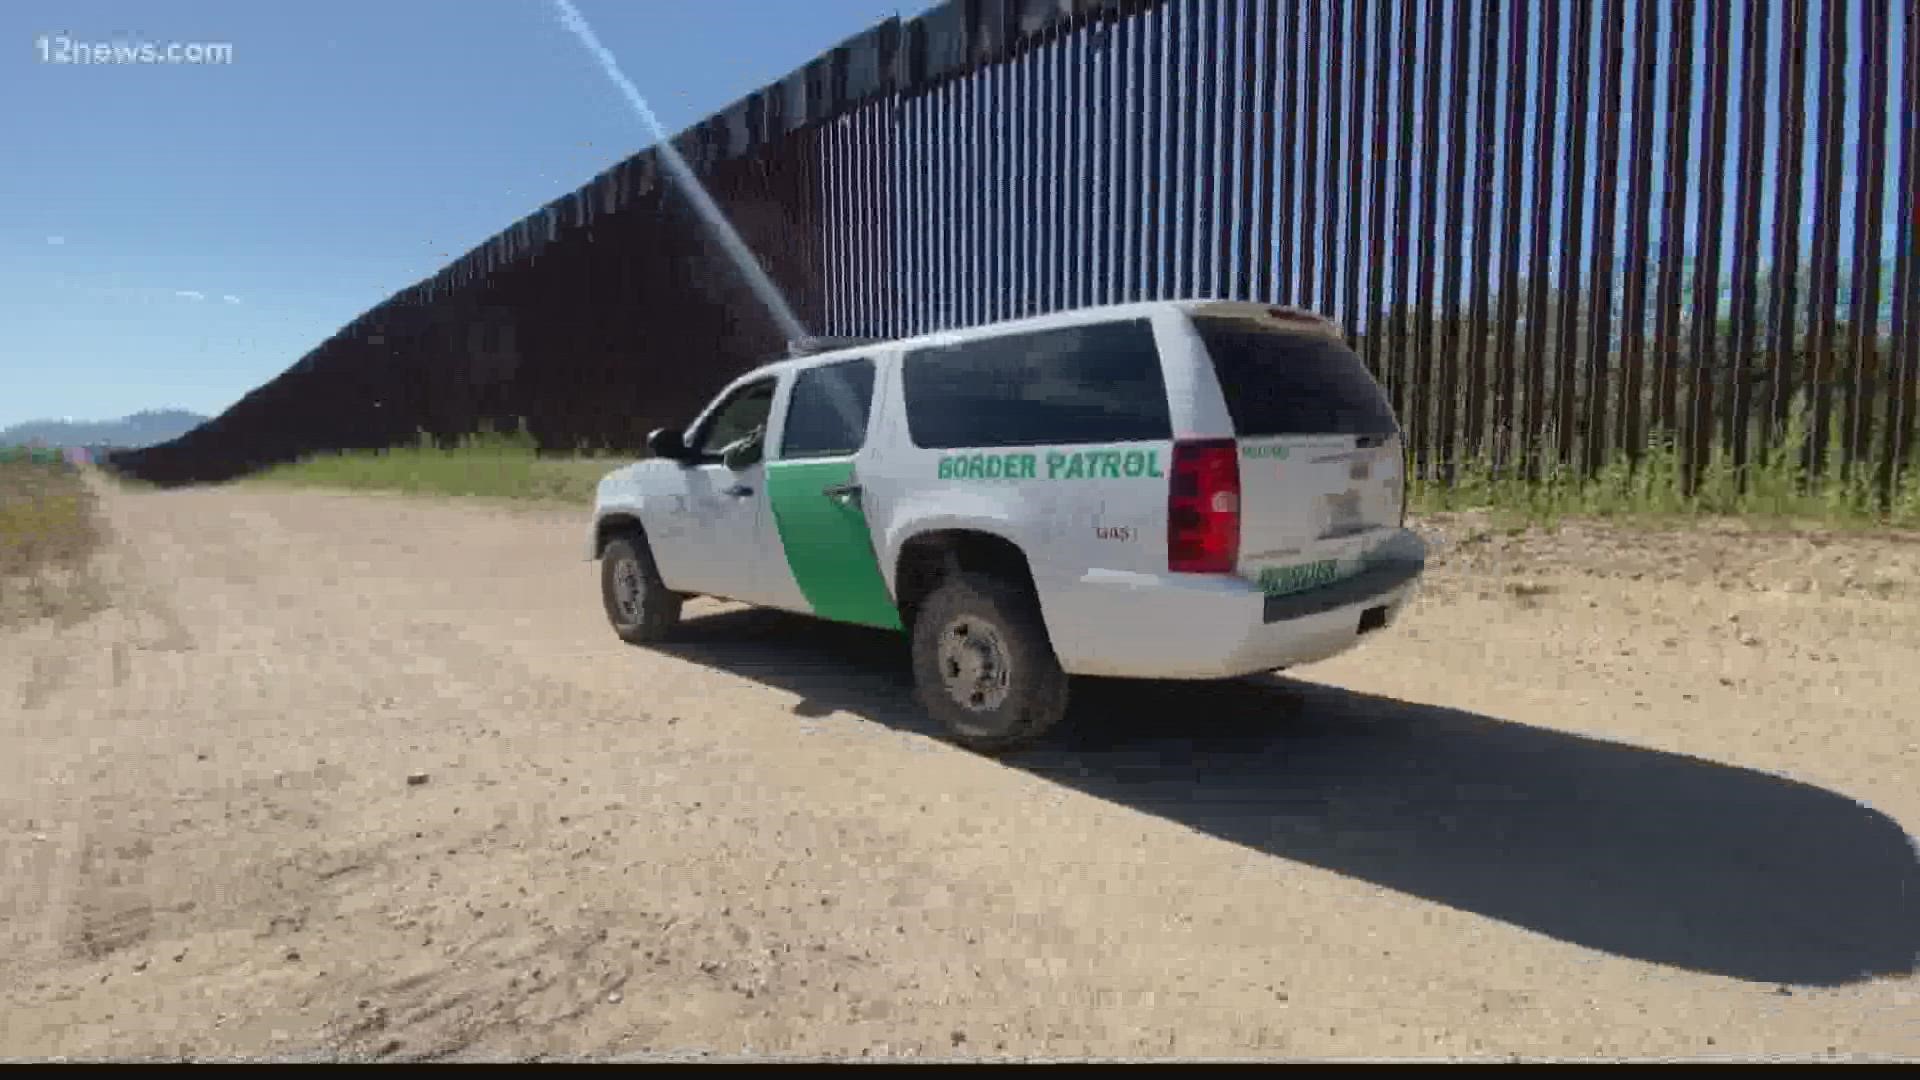 The number of migrants attempting to cross the U.S.-Mexico border has reached a 21 year high during the month of July. Arizona agents give a tour of the border.